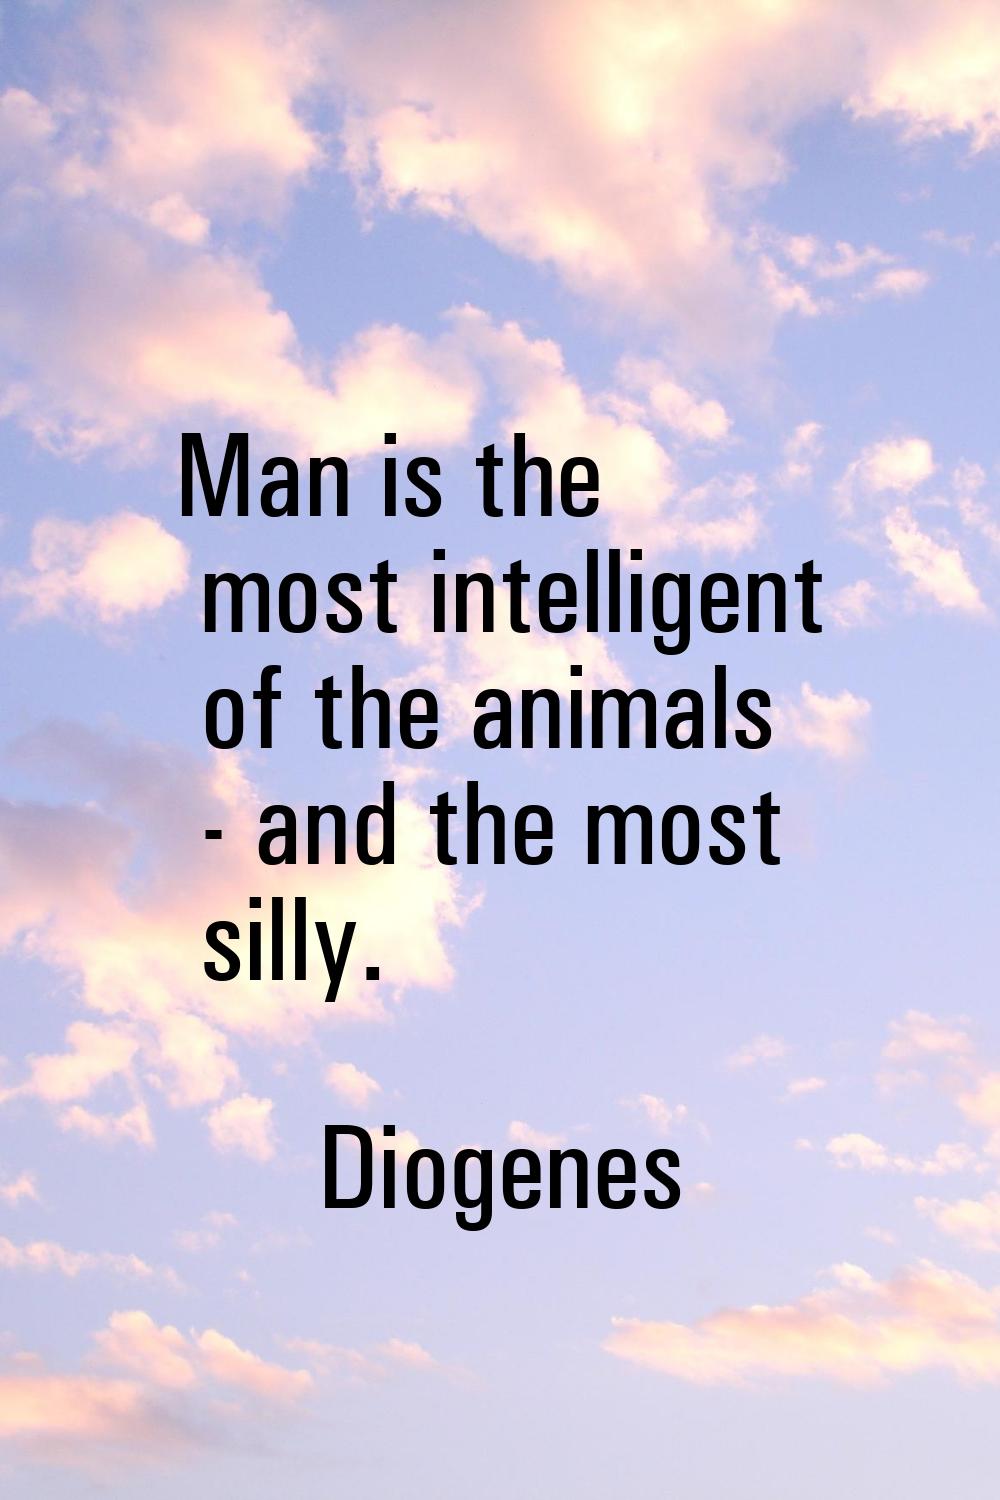 Man is the most intelligent of the animals - and the most silly.